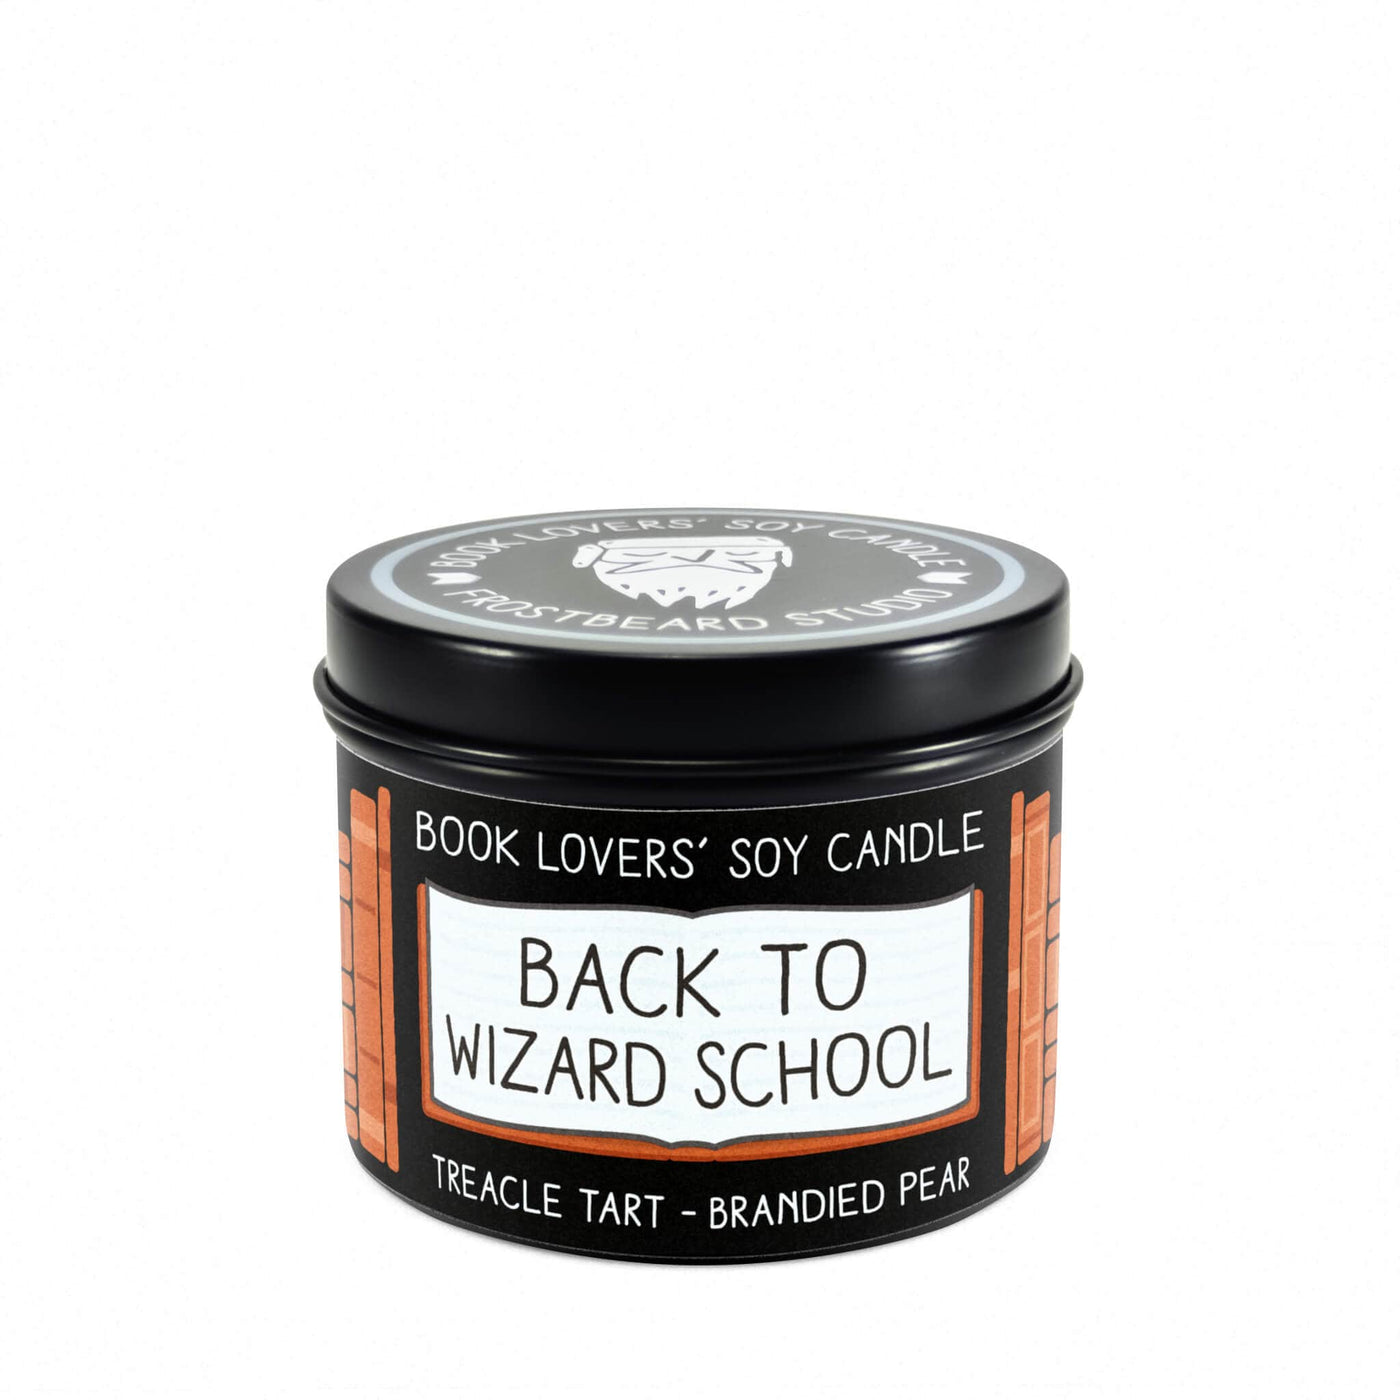 Back to Wizard School - 4 oz Tin - Book Lovers' Soy Candle - Frostbeard Studio